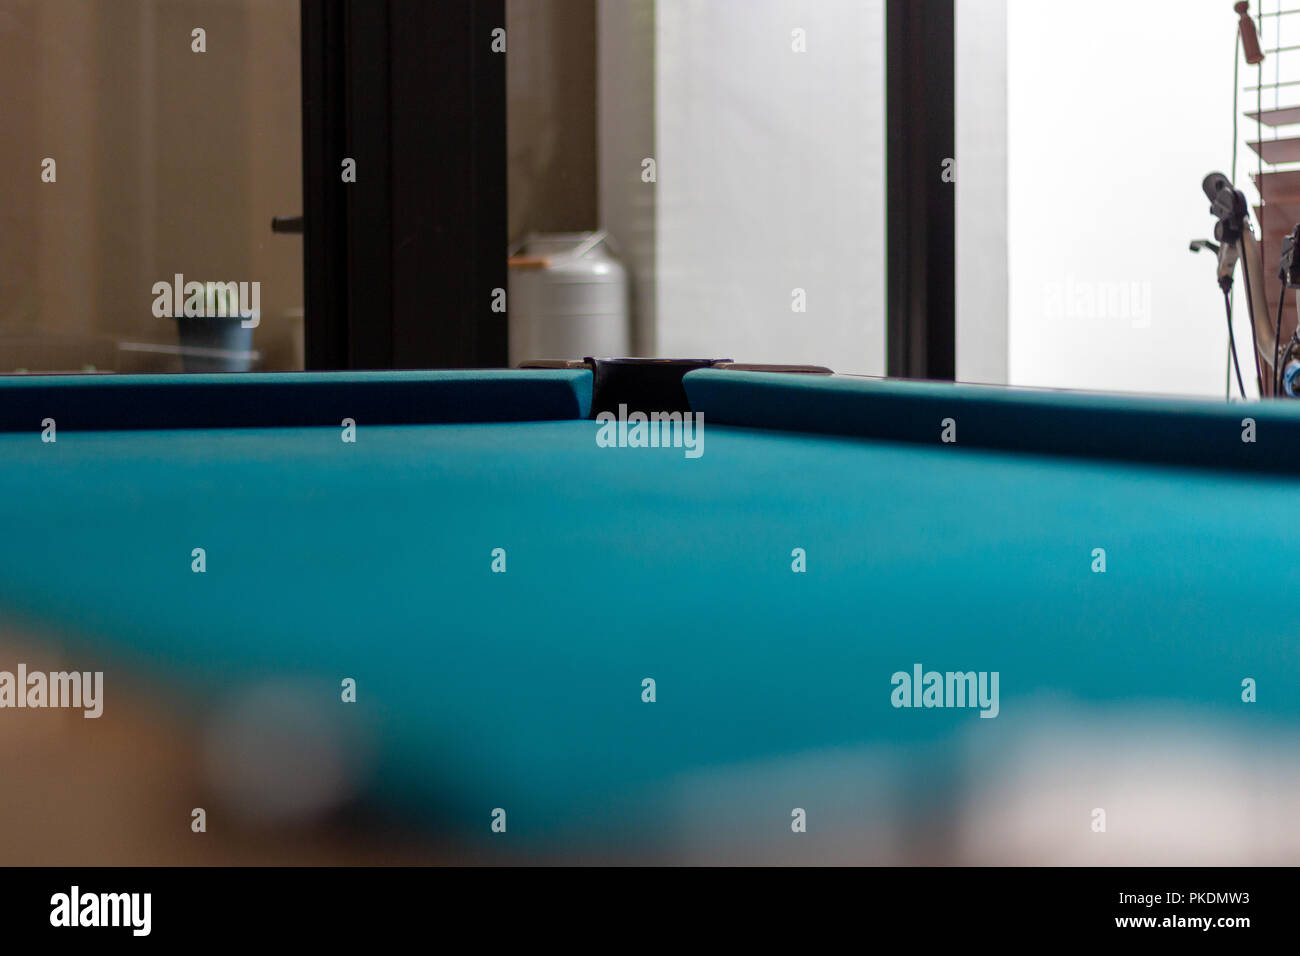 Empty snooker table and corner view with hole. Empty billiard pool table with blue cloth Stock Photo